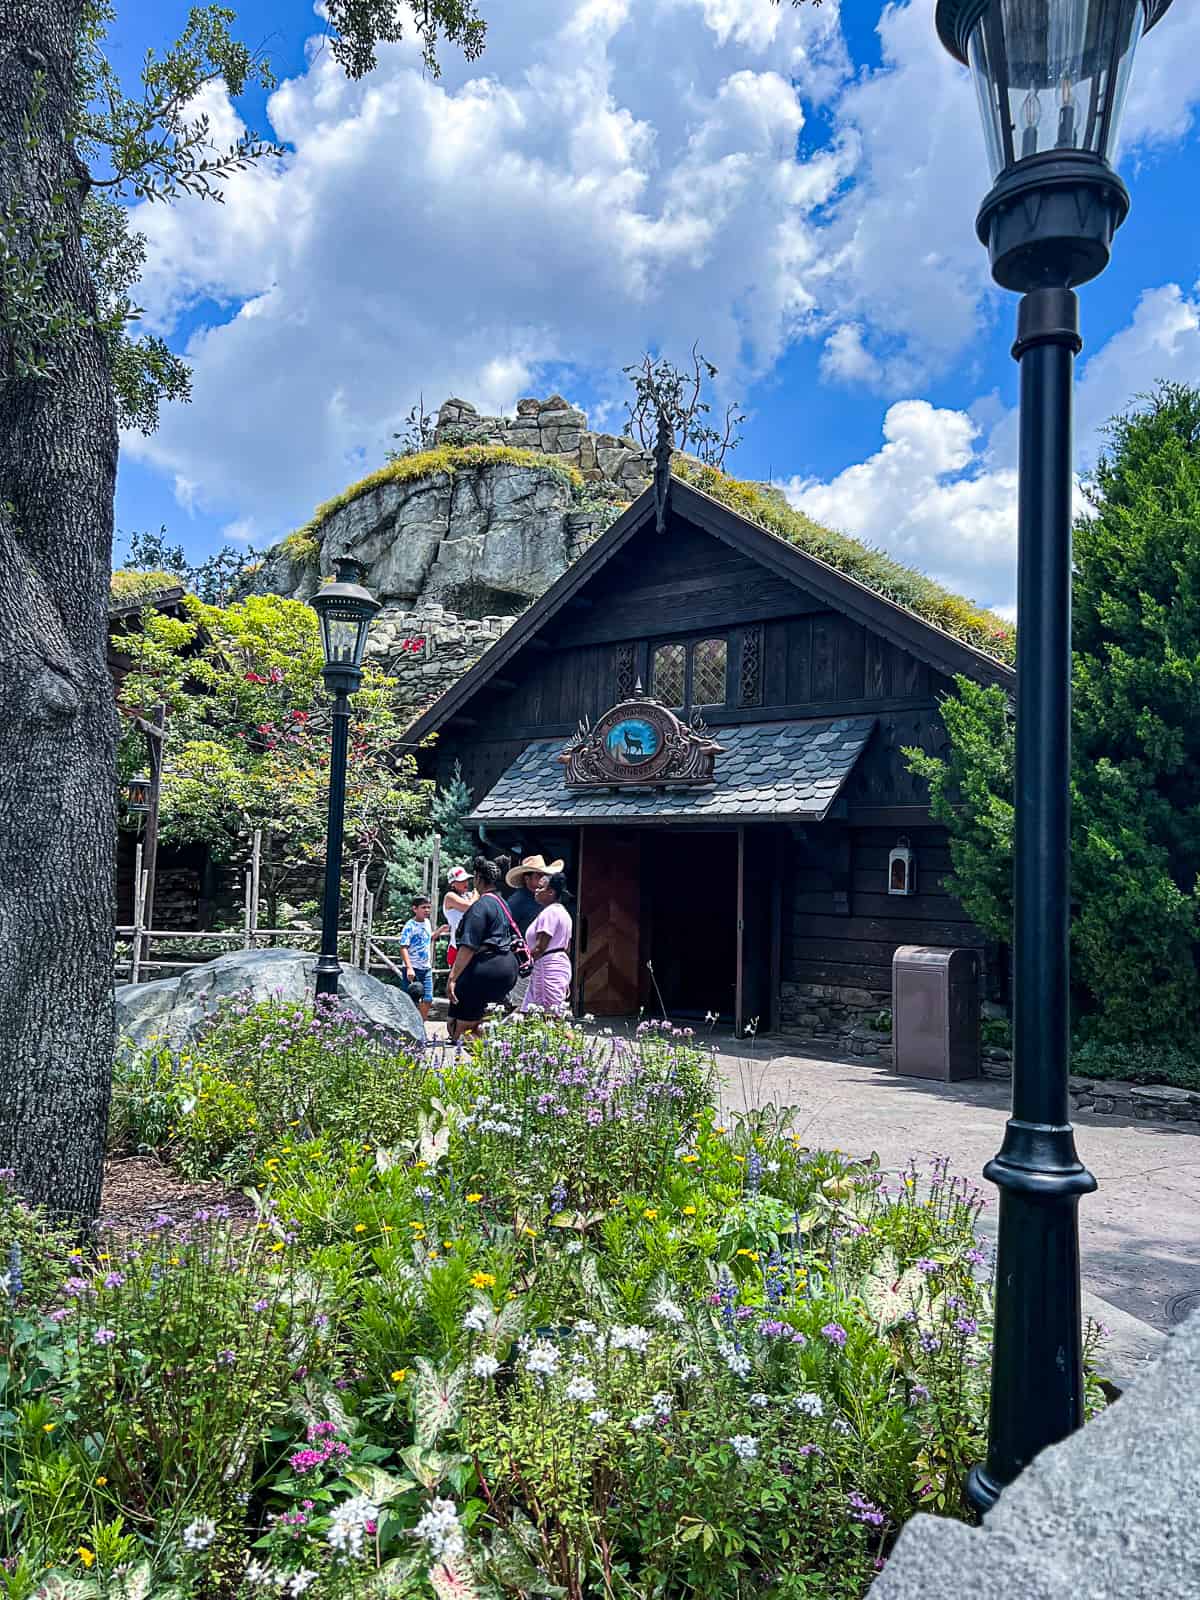 View of attractions at Norway Pavilion in Epcot Park at Disney World